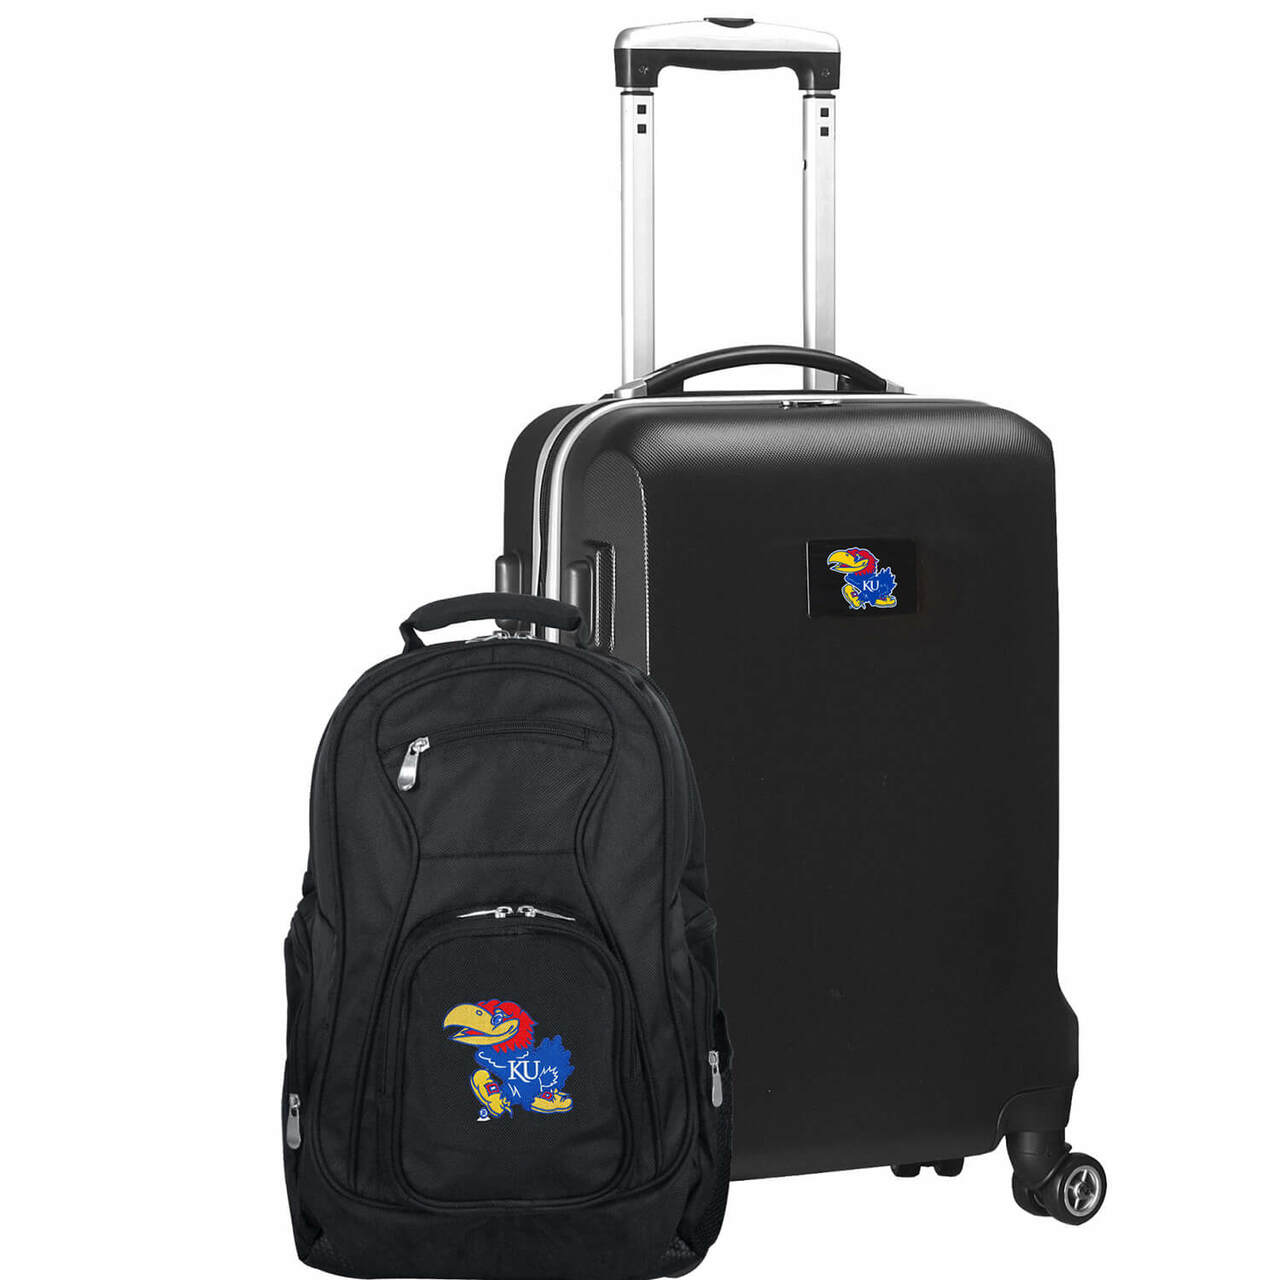 Kansas Jayhawks Deluxe 2-Piece Backpack and Carry-on Set in Black